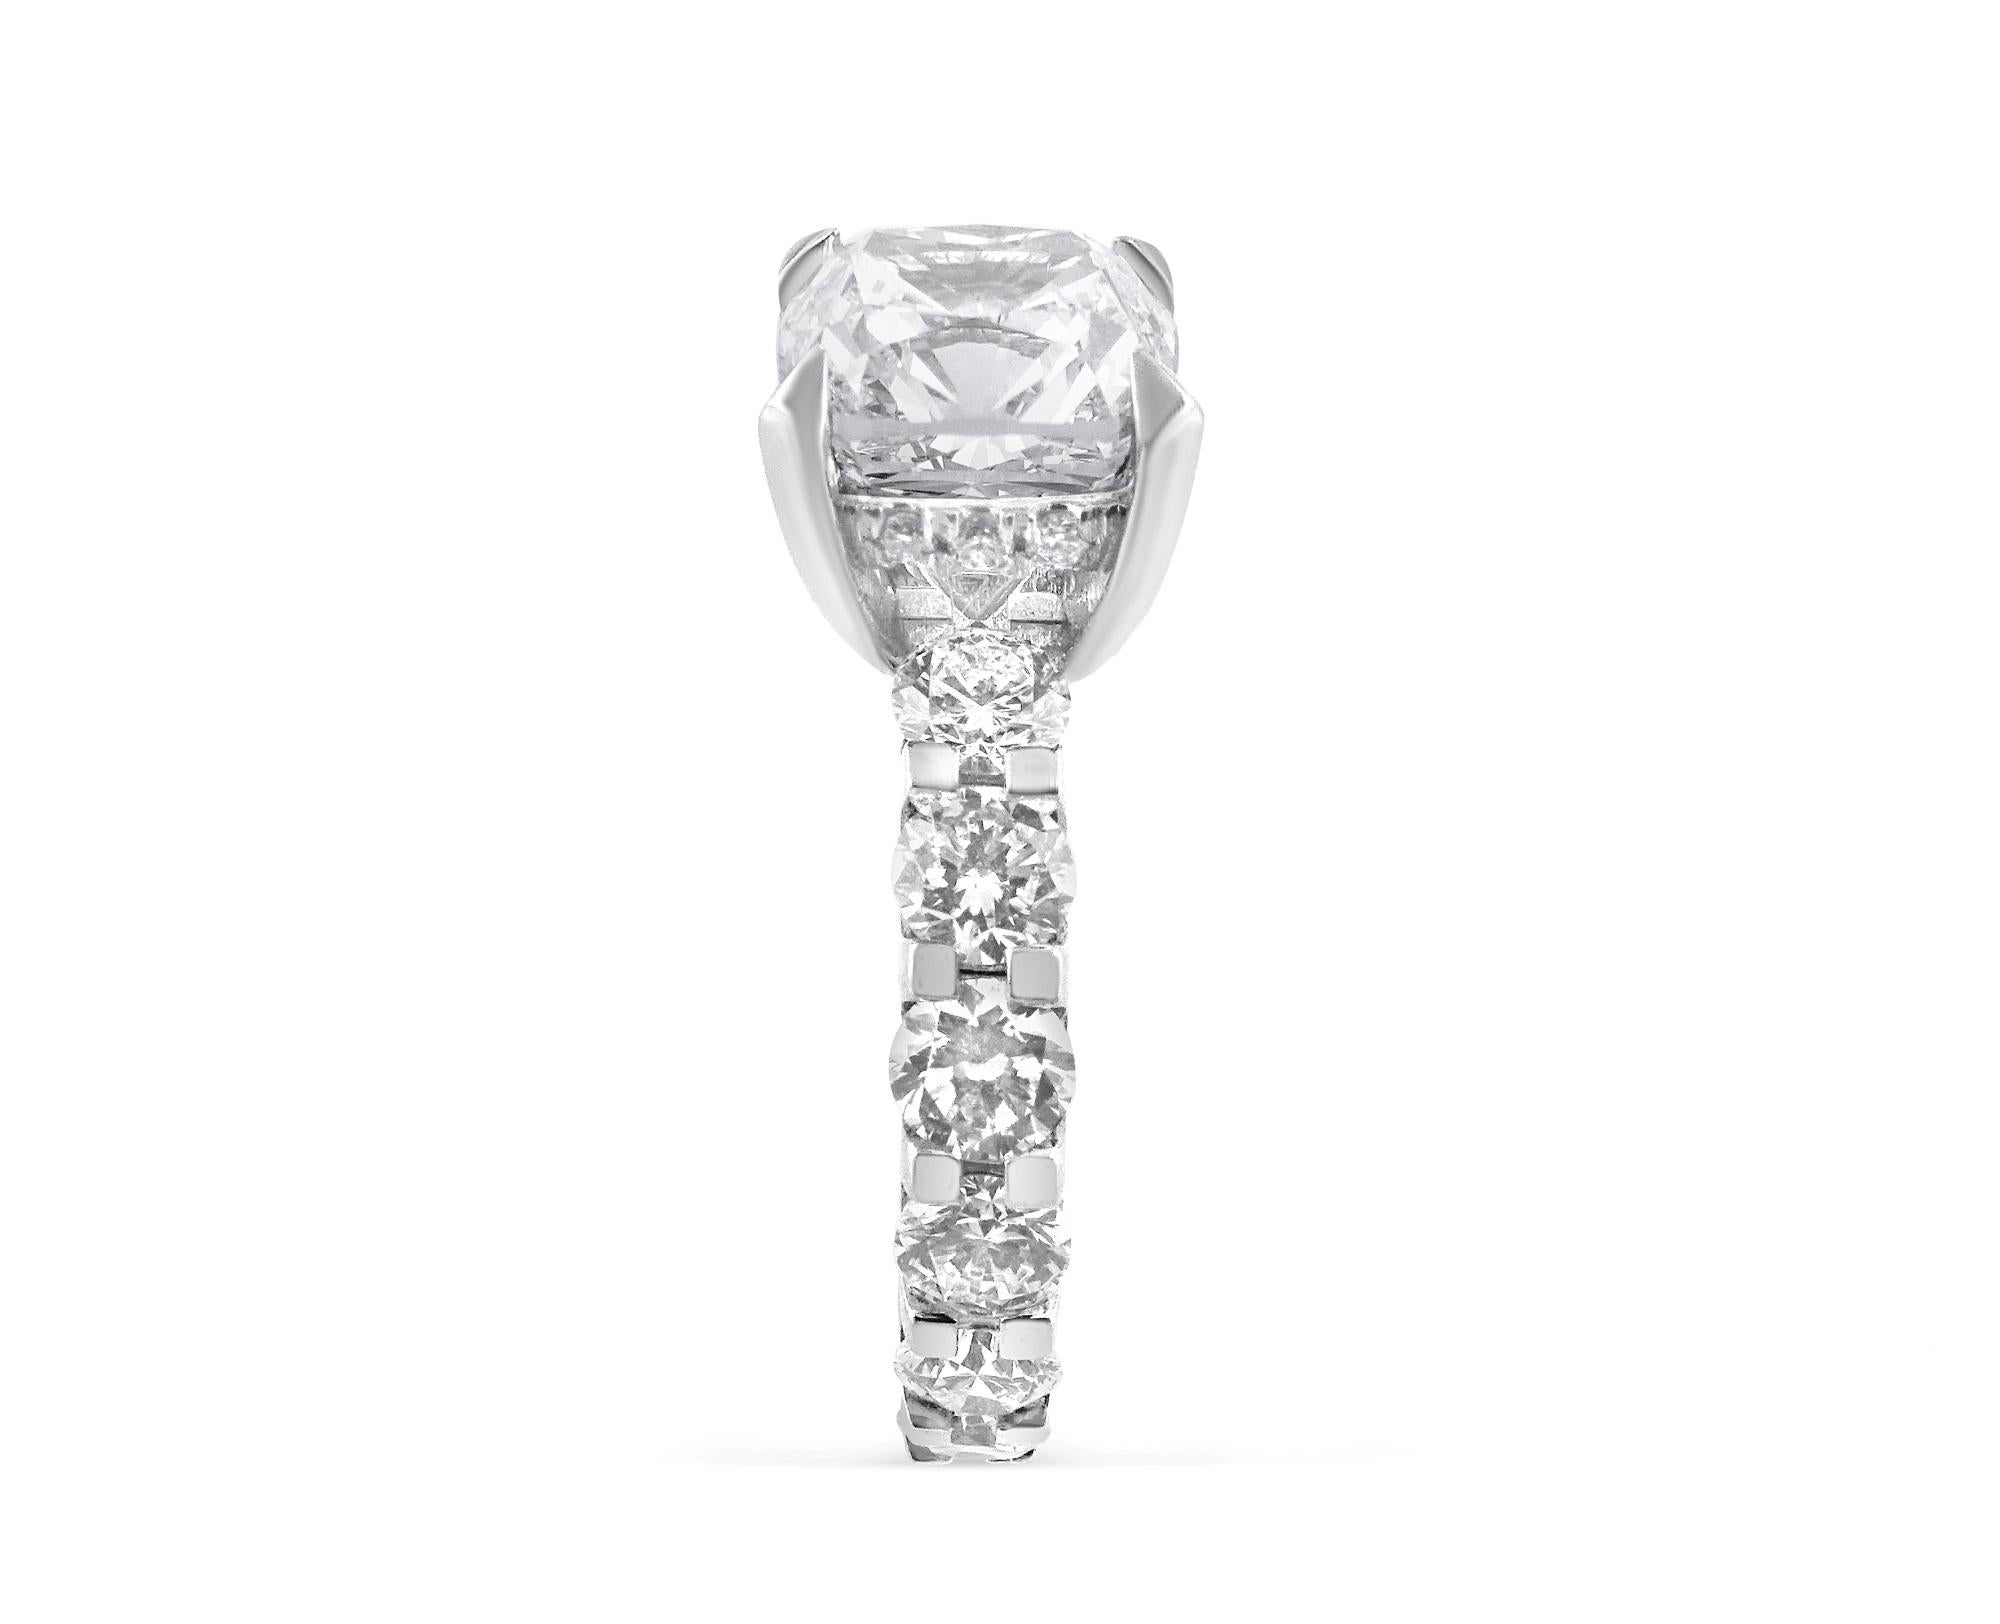 WHITE GOLD CUSHION CUT DIAMOND RING WITH SIDE STONES - 5.83 CT


Set in 18K White gold


Total cushion cut diamond weight: 3.02 ct
[ 1 diamond ]
Color: G
Clarity: VVS2

Total round white diamond weight: 2.69 ct
[ 14 diamonds ]
Color: G
Clarity: